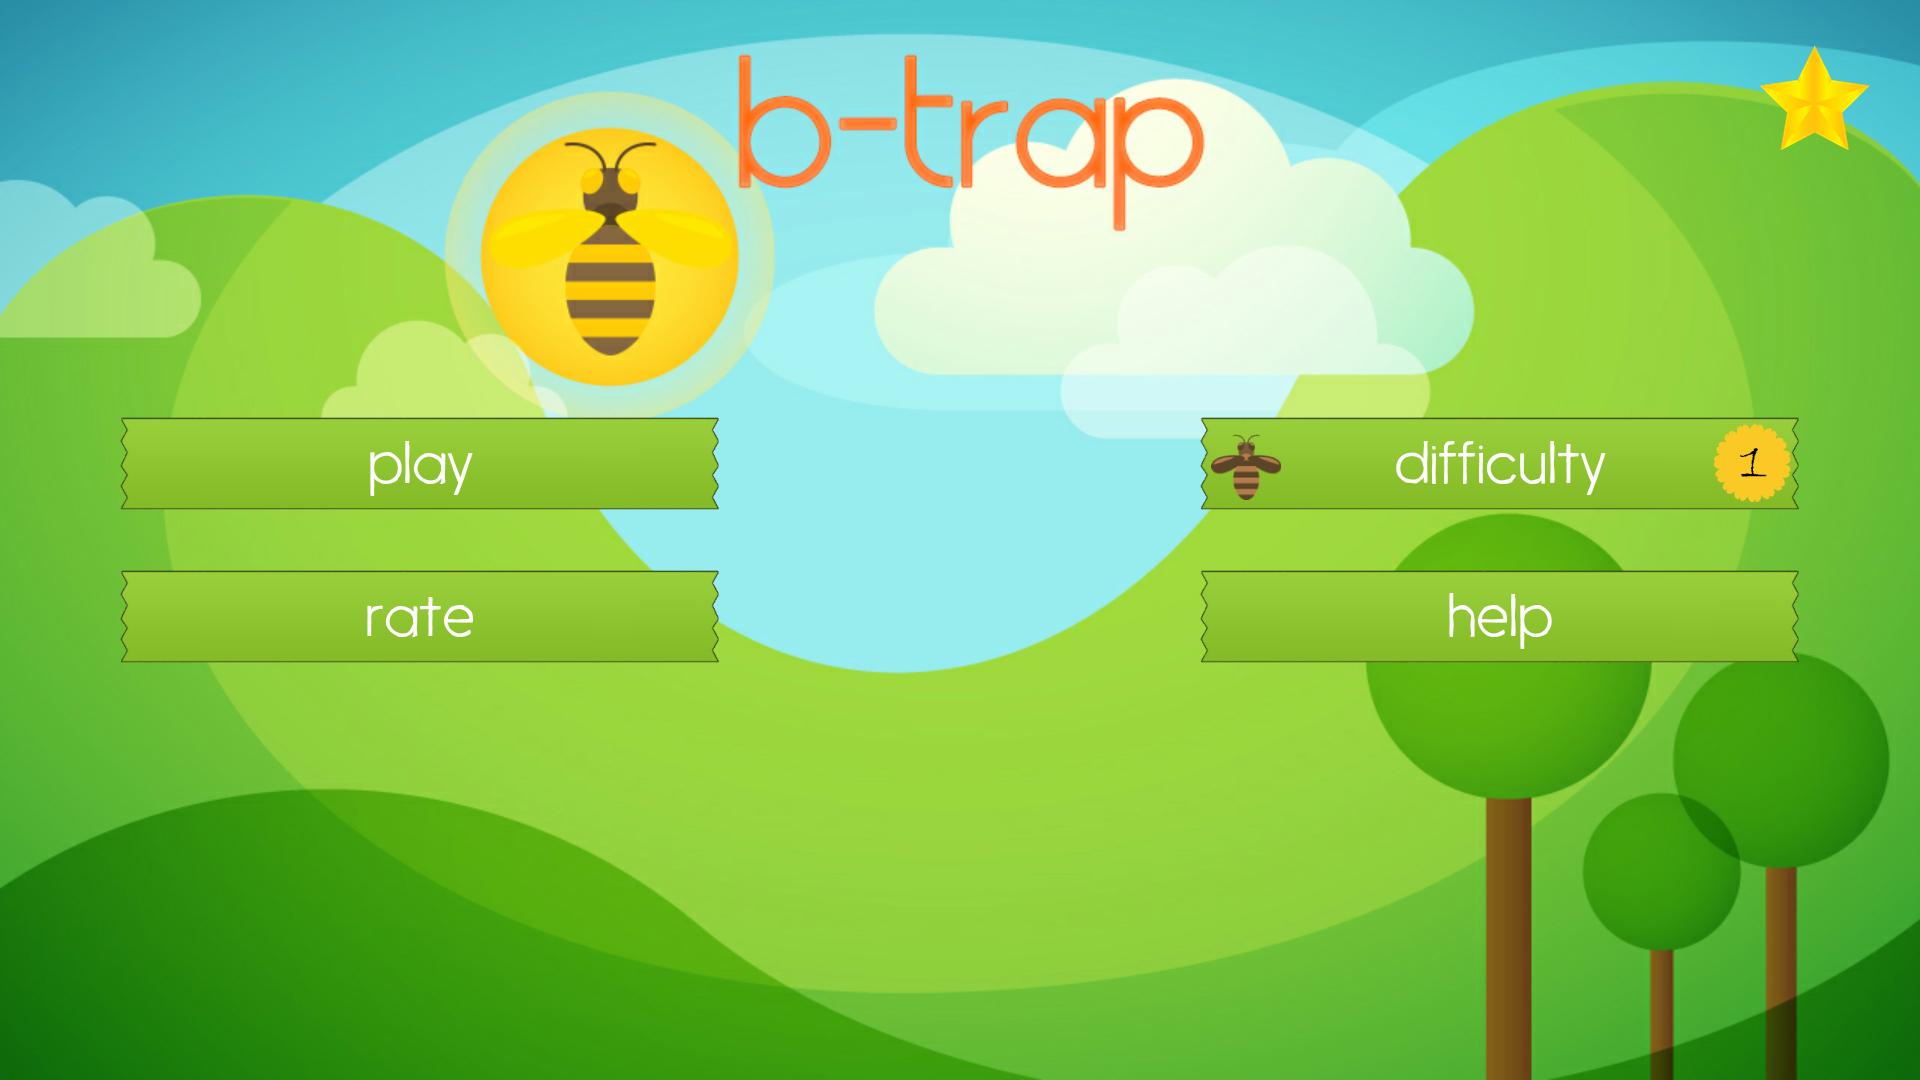 Bee Trap. Гугл треп. Trap android games